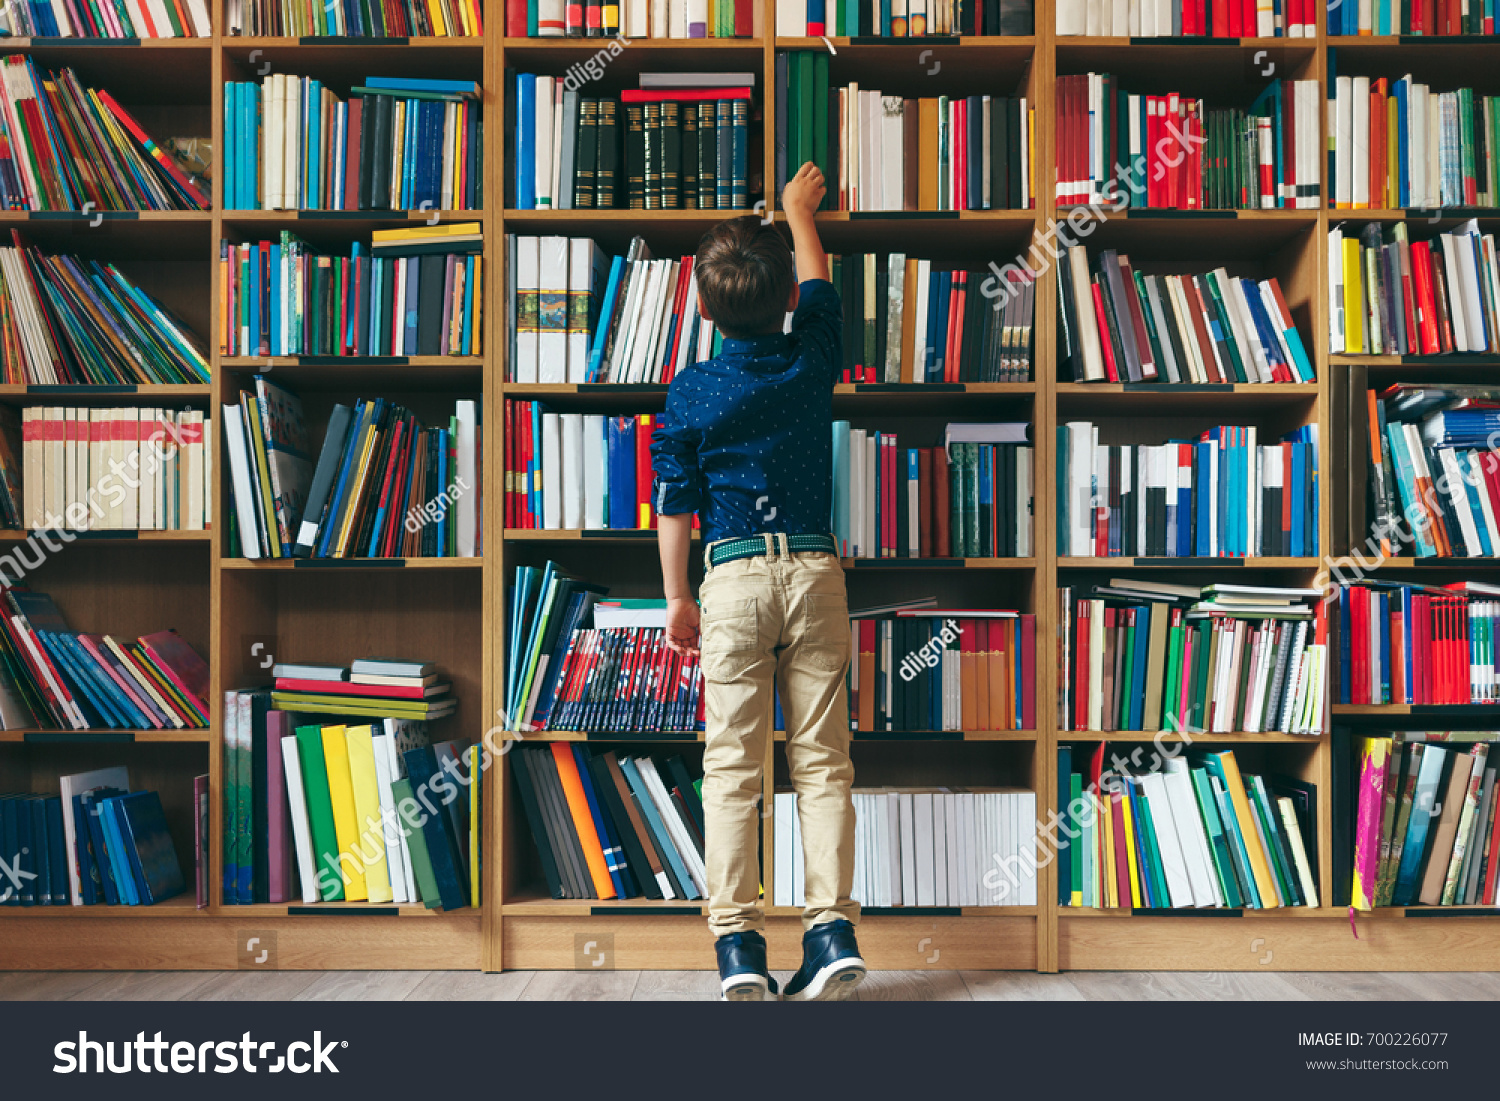 Back view, boy stretches after a book on multi colored bookshelf in library. Education, Knowledge, Bookstore, Lecture. #700226077